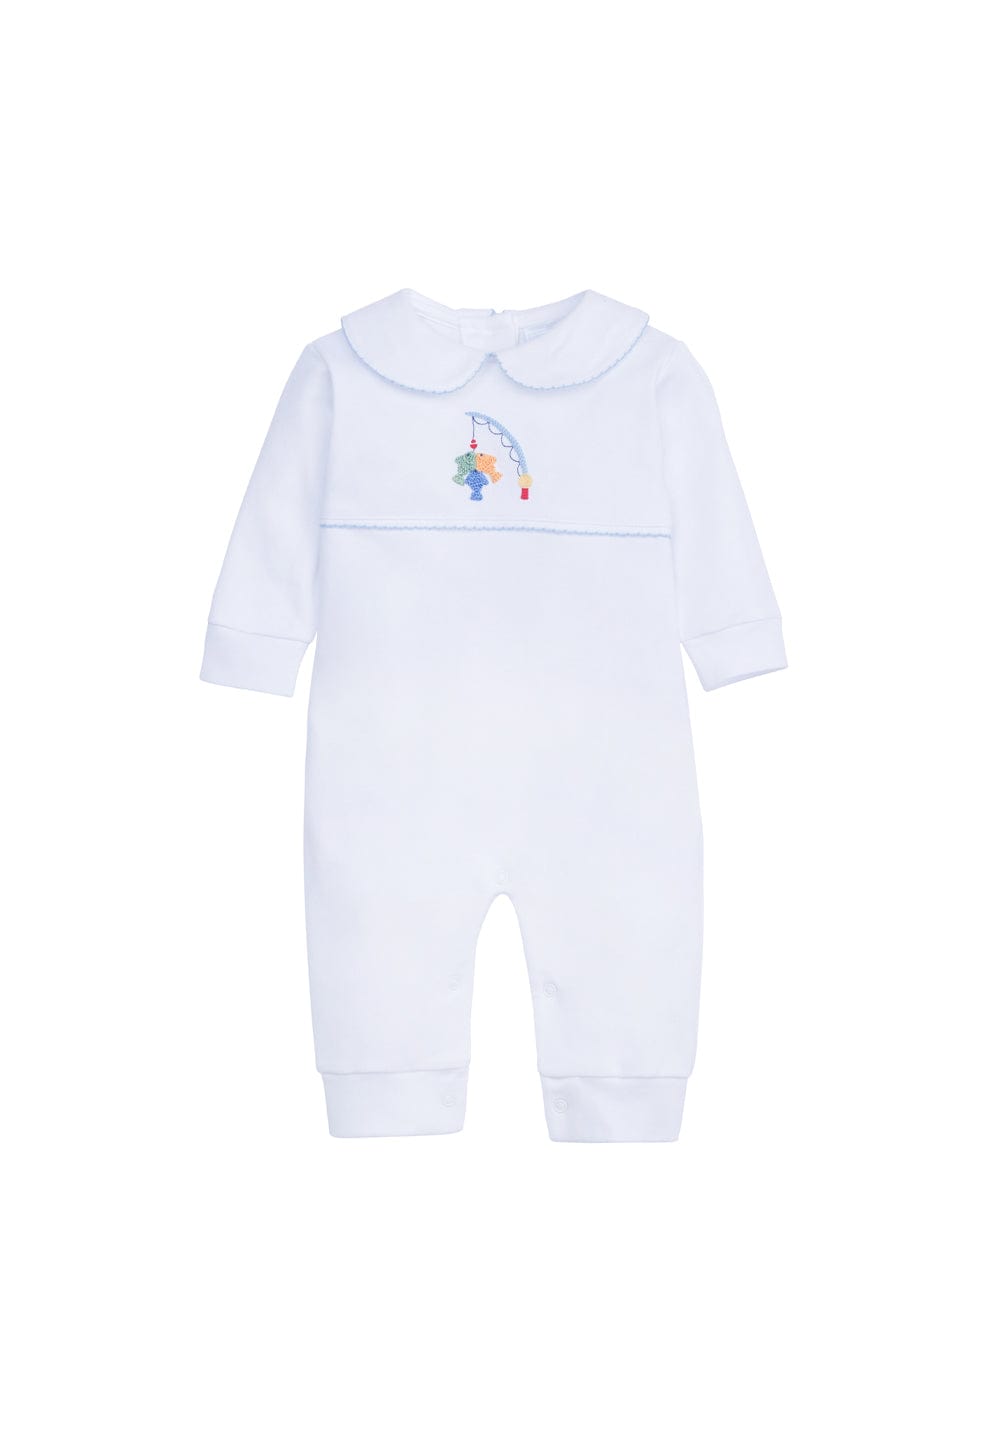 classic childrens clothing boys white playsuit with crochet fishing emblem and blue pique finish